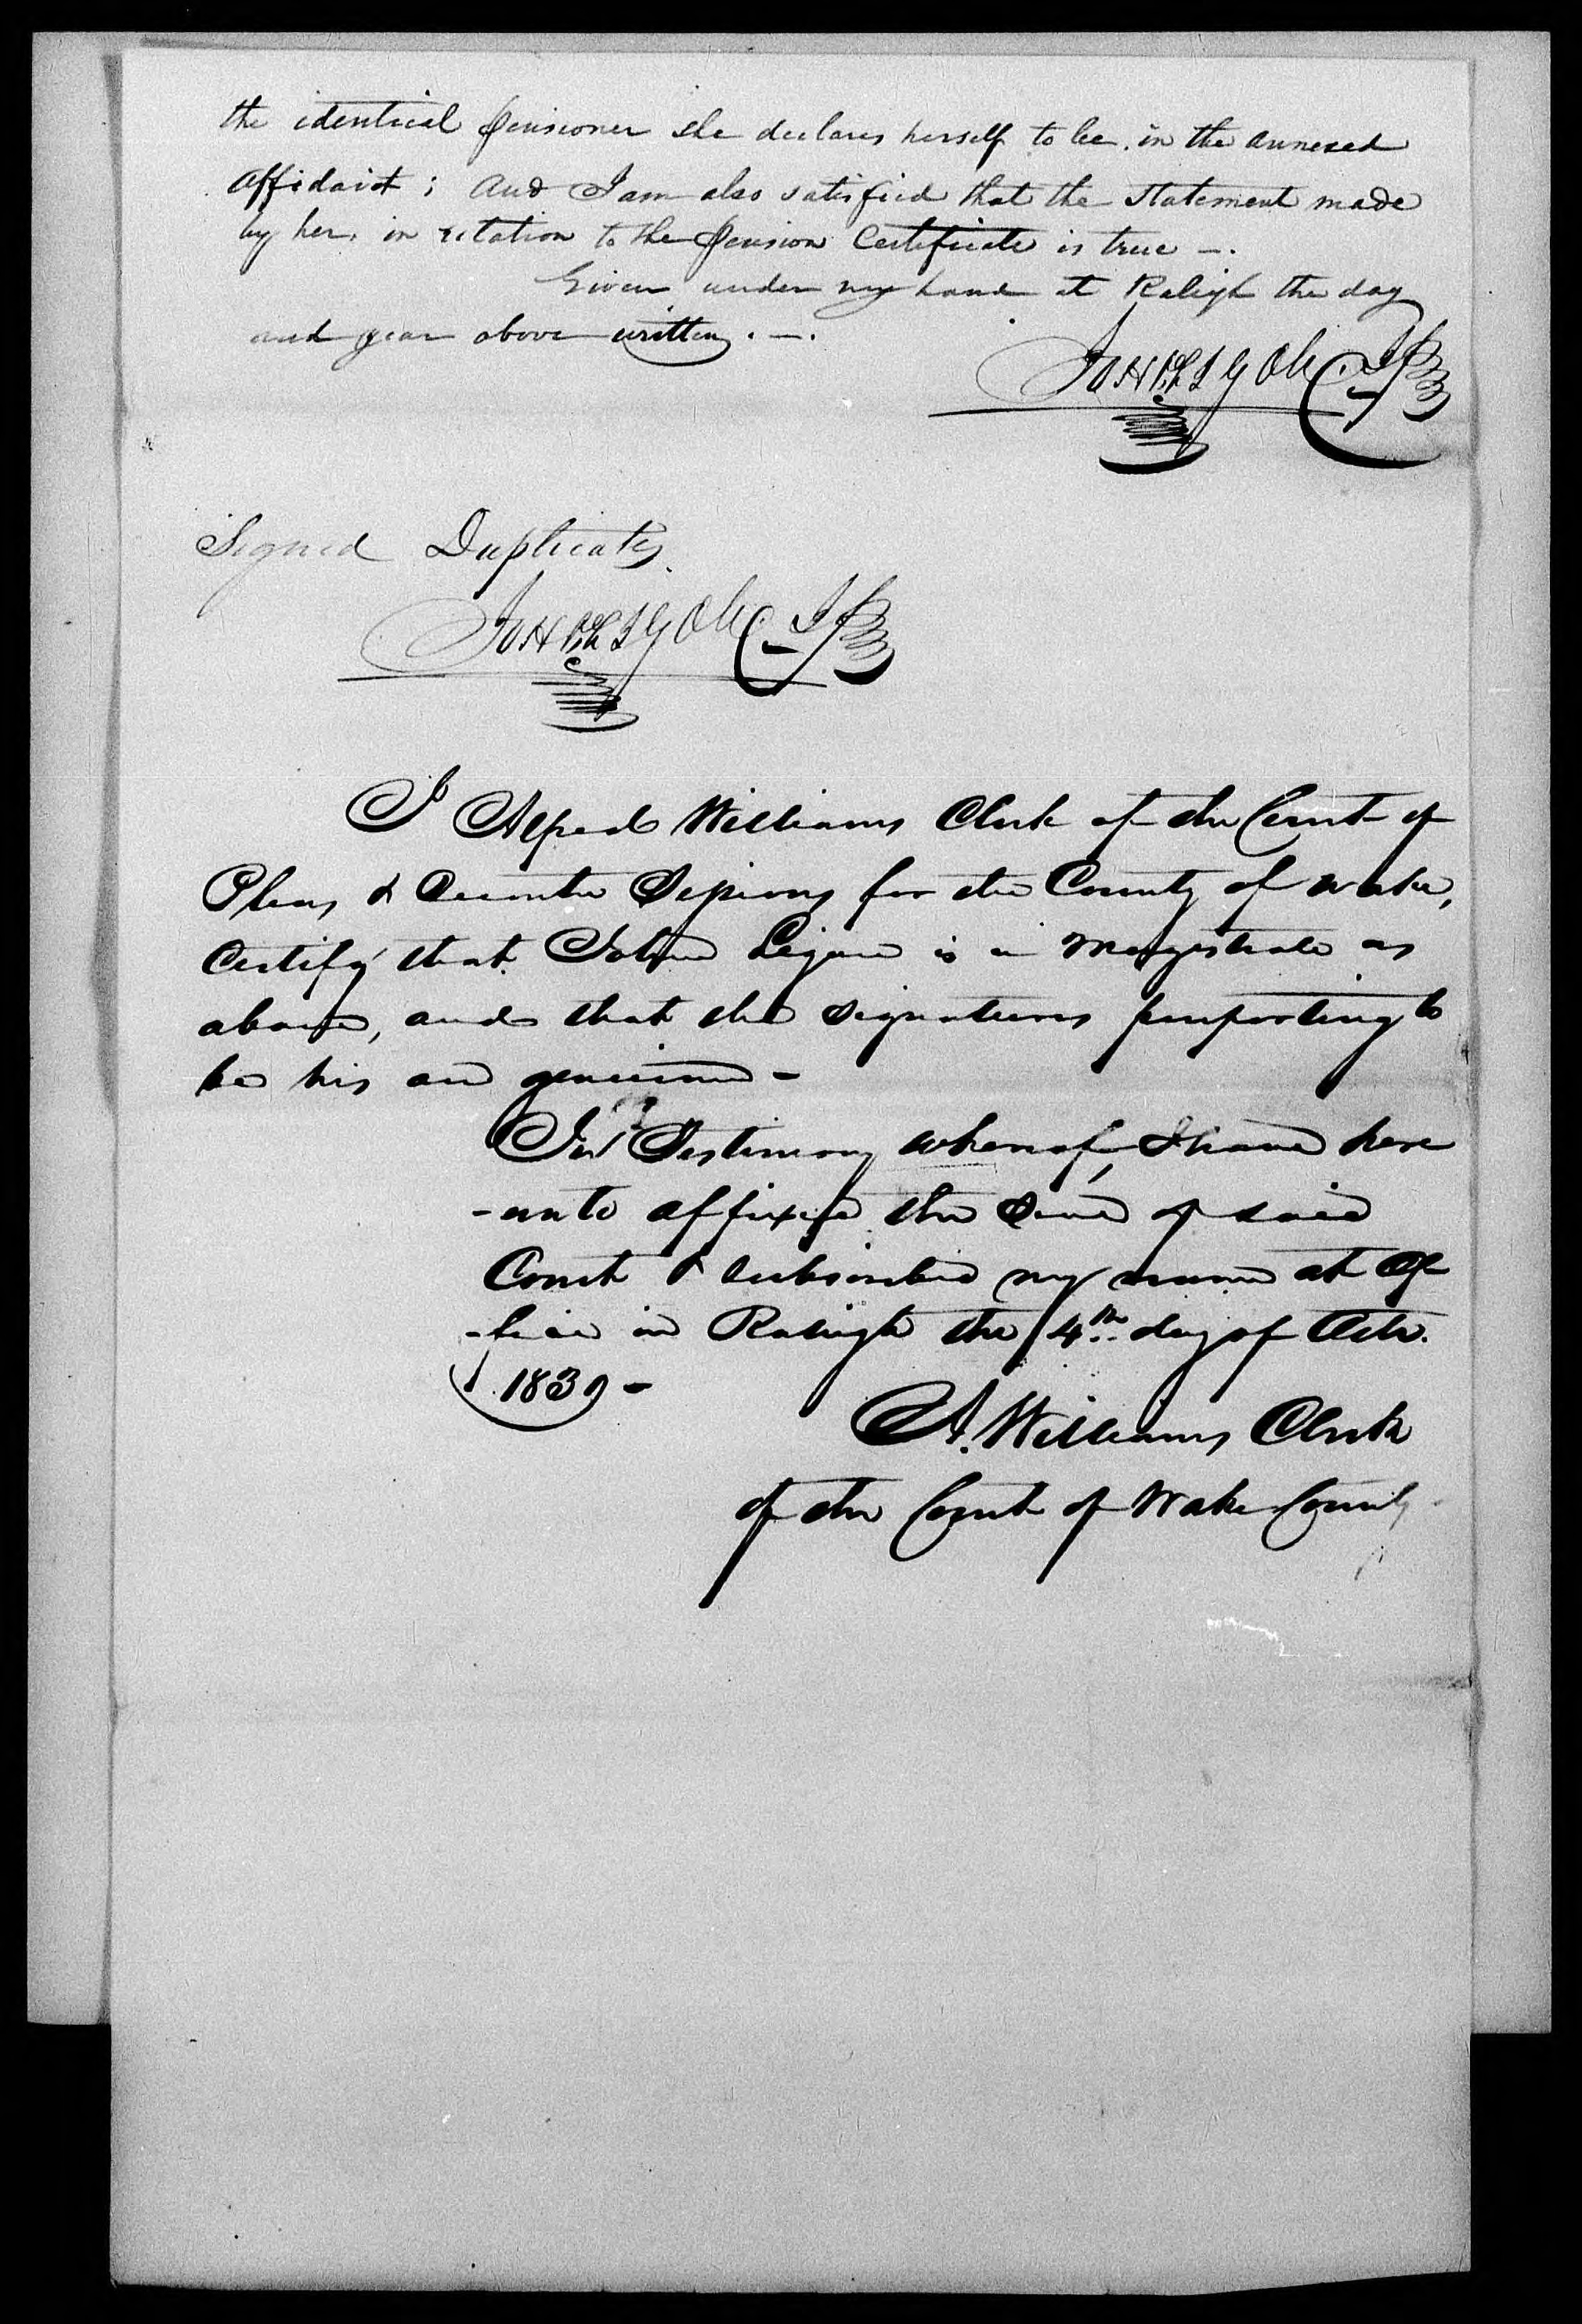 Application for a Widow's Pension from Rachel Locus, 4 October 1839, page 2